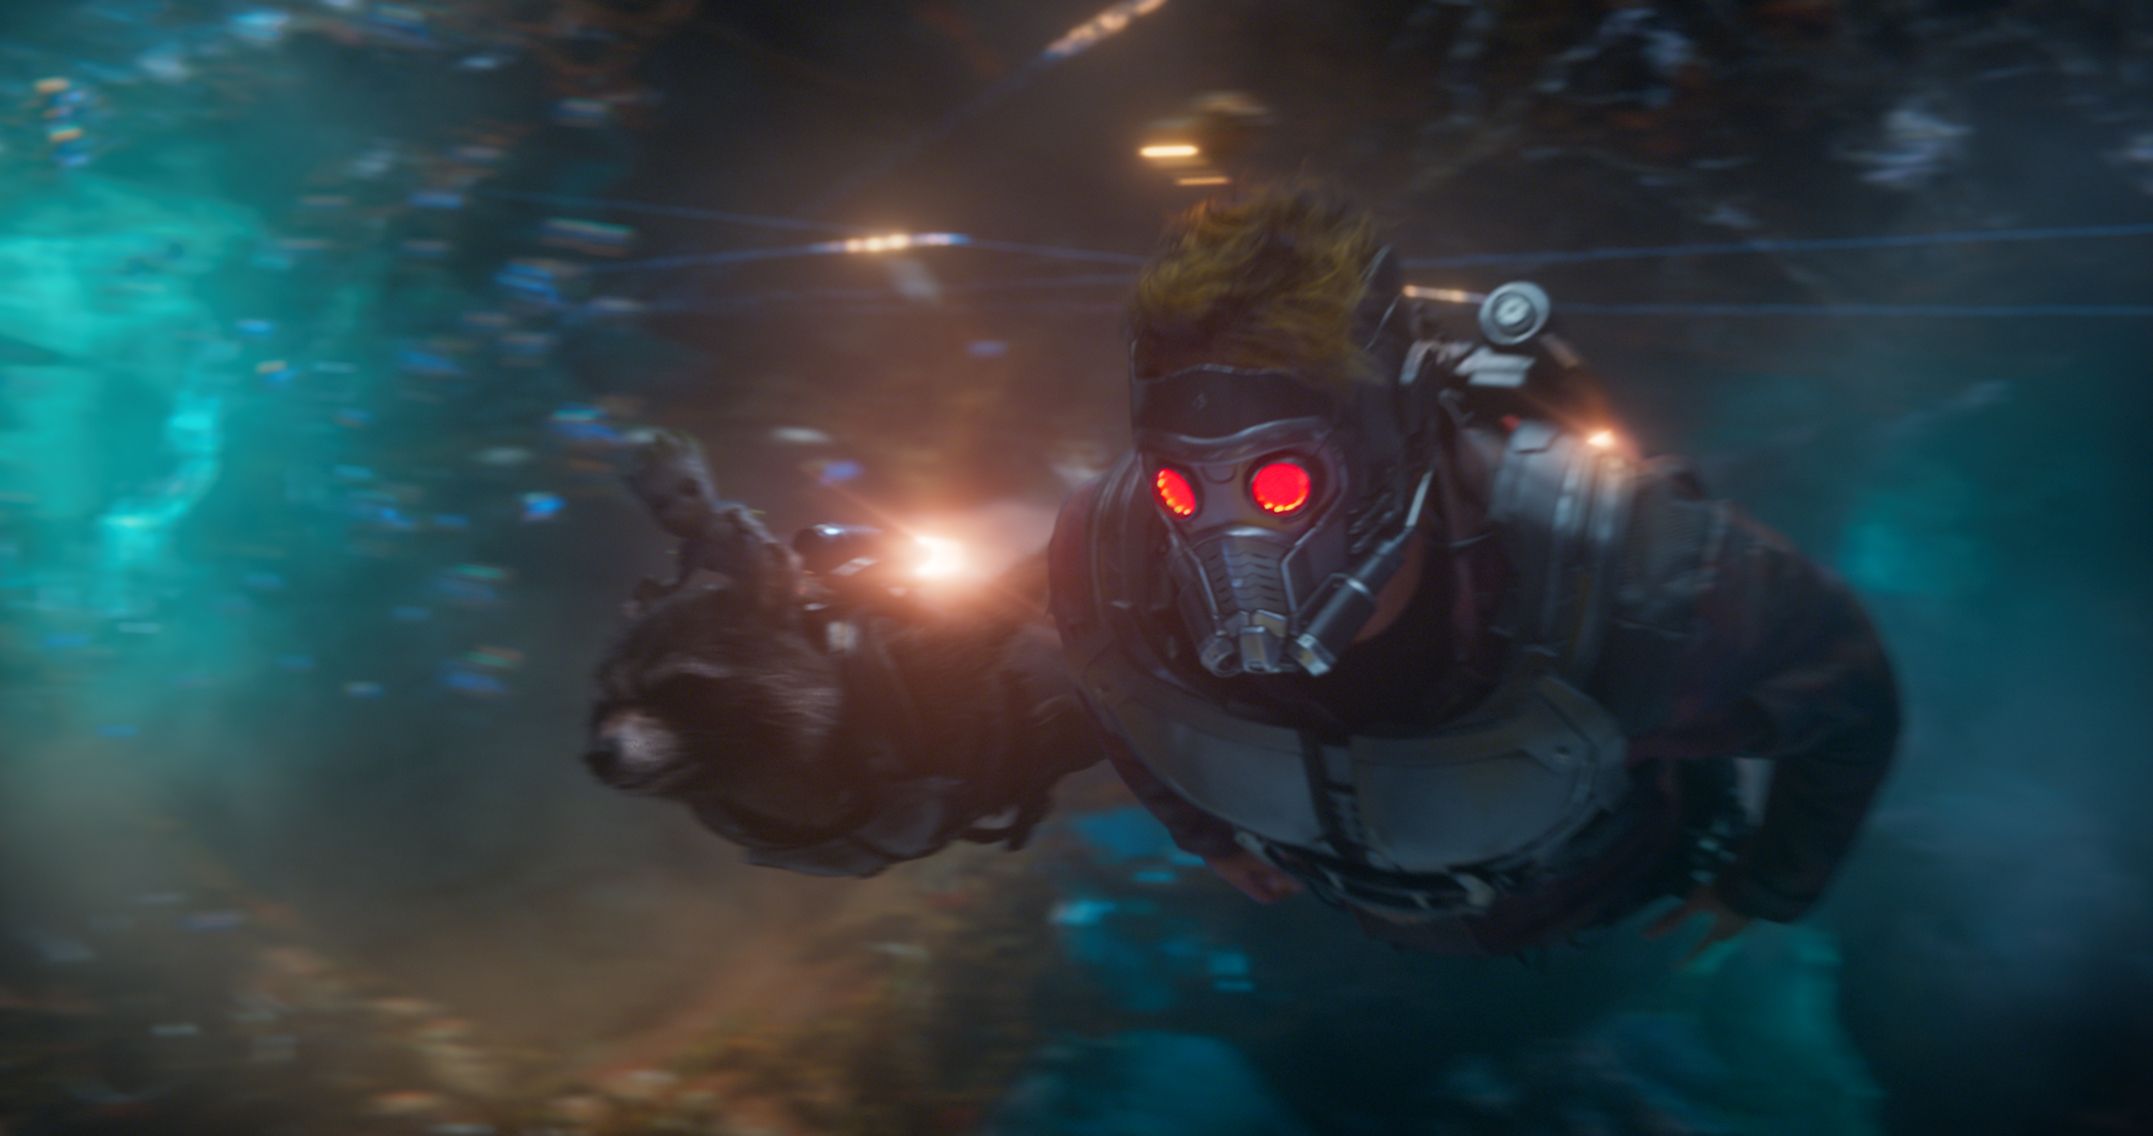 Guardians of the Galaxy Vol 2 Rocket and Star-Lord